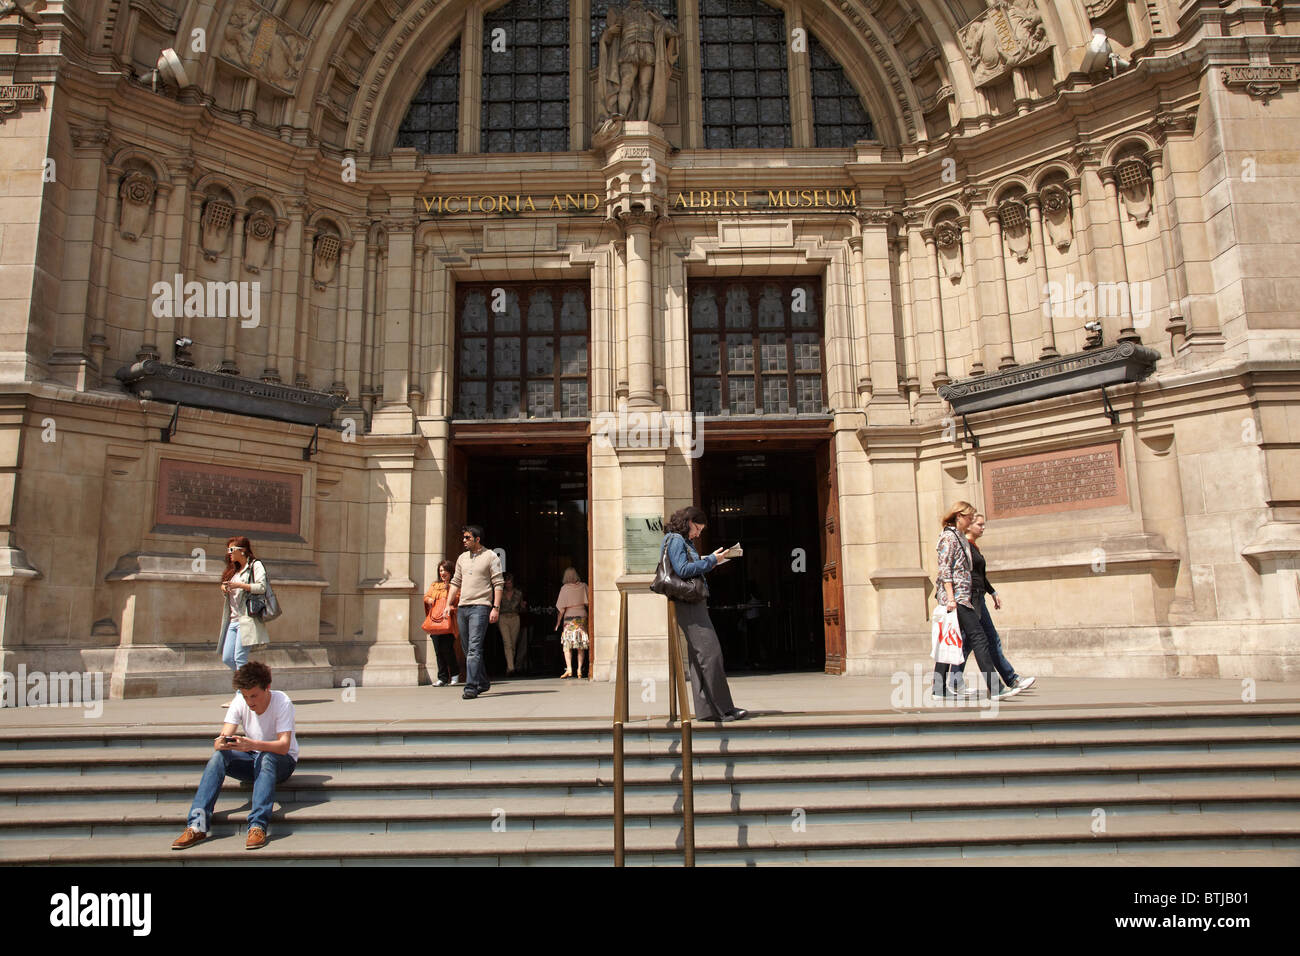 Entrance, Victoria and Albert Museum, Cromwell Road, London, England, United Kingdom Stock Photo